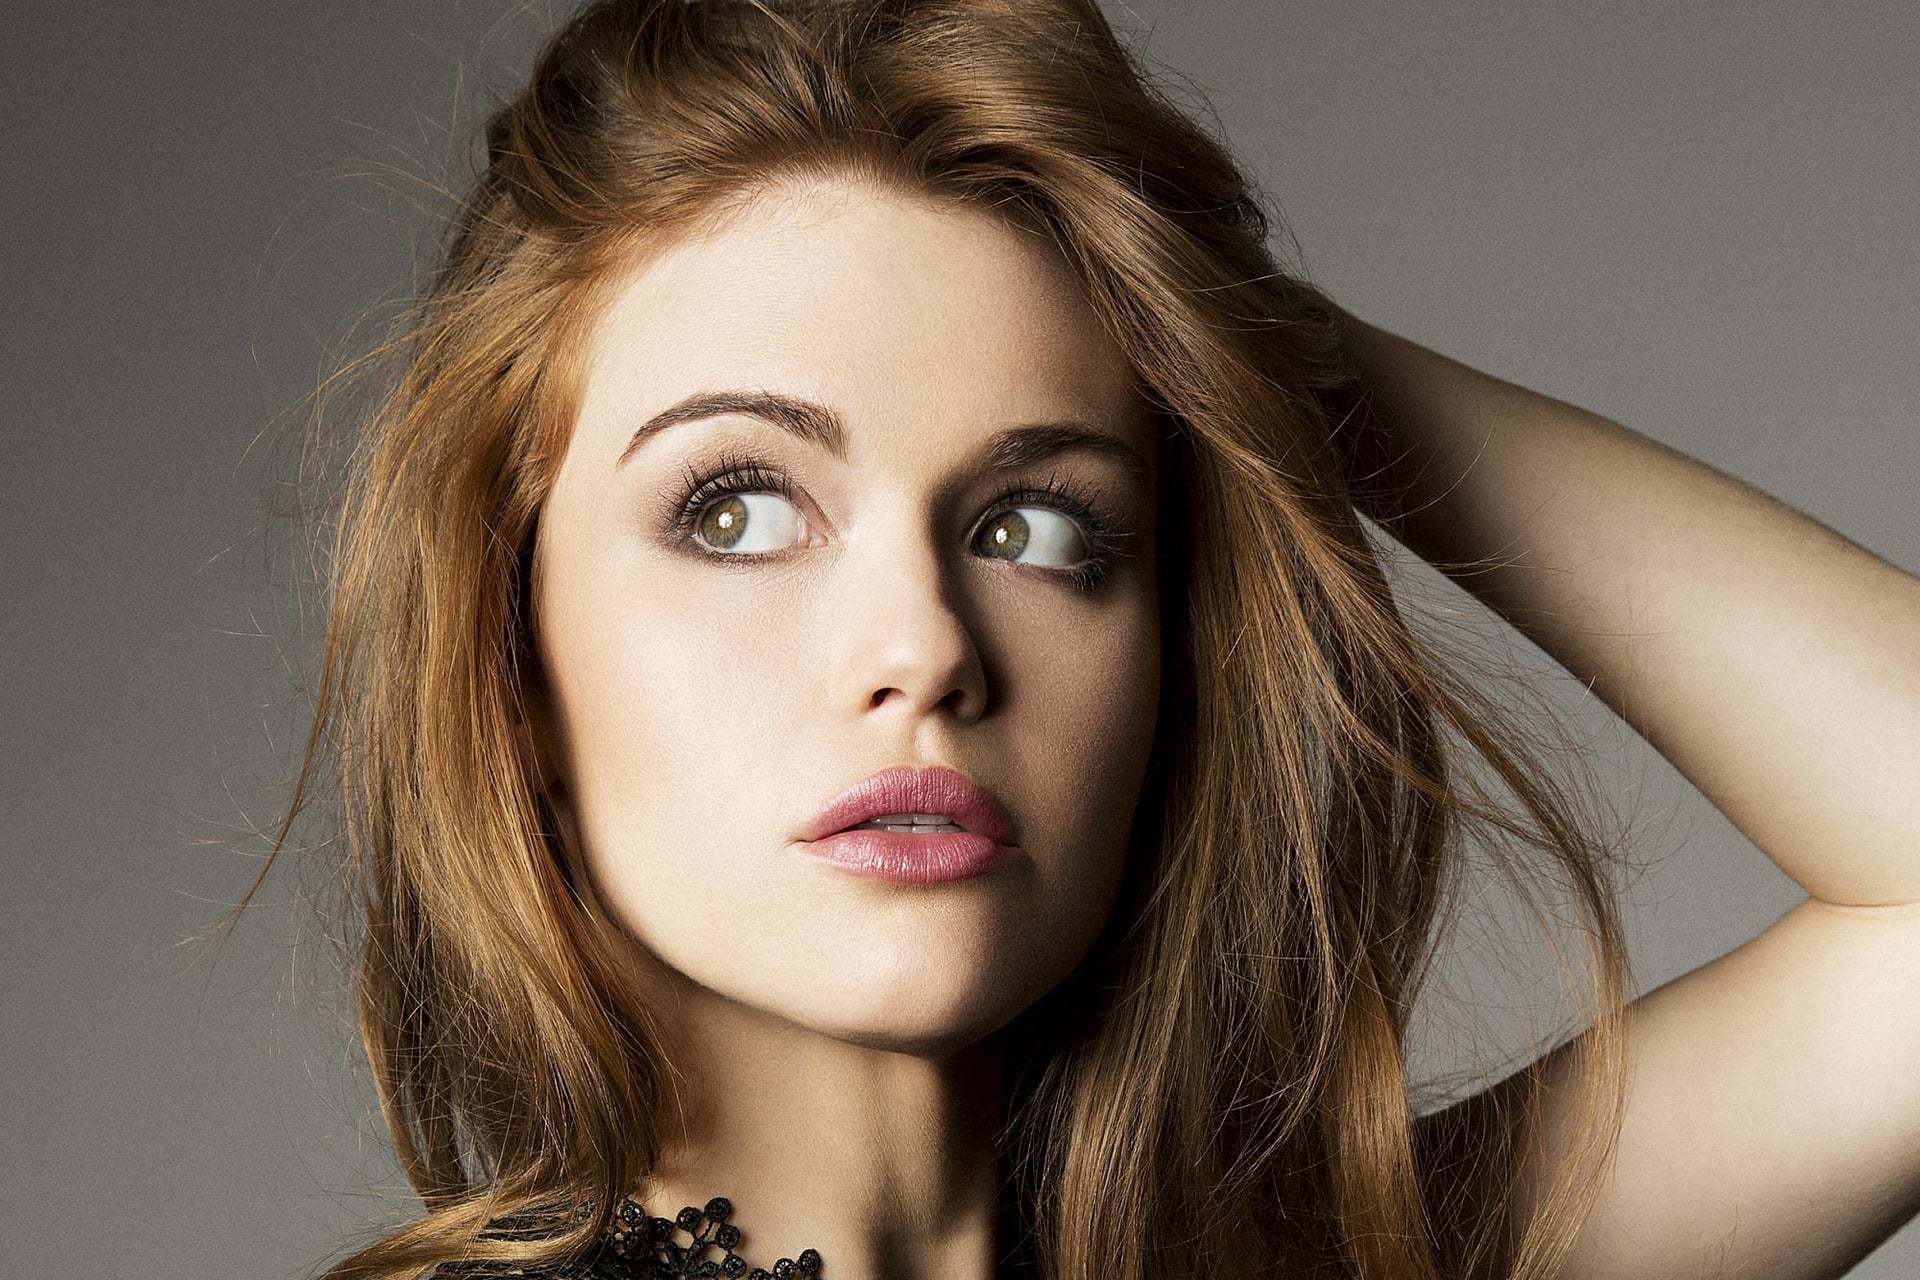 Holland Roden Wallpapers Image Photos Pictures Backgrounds.